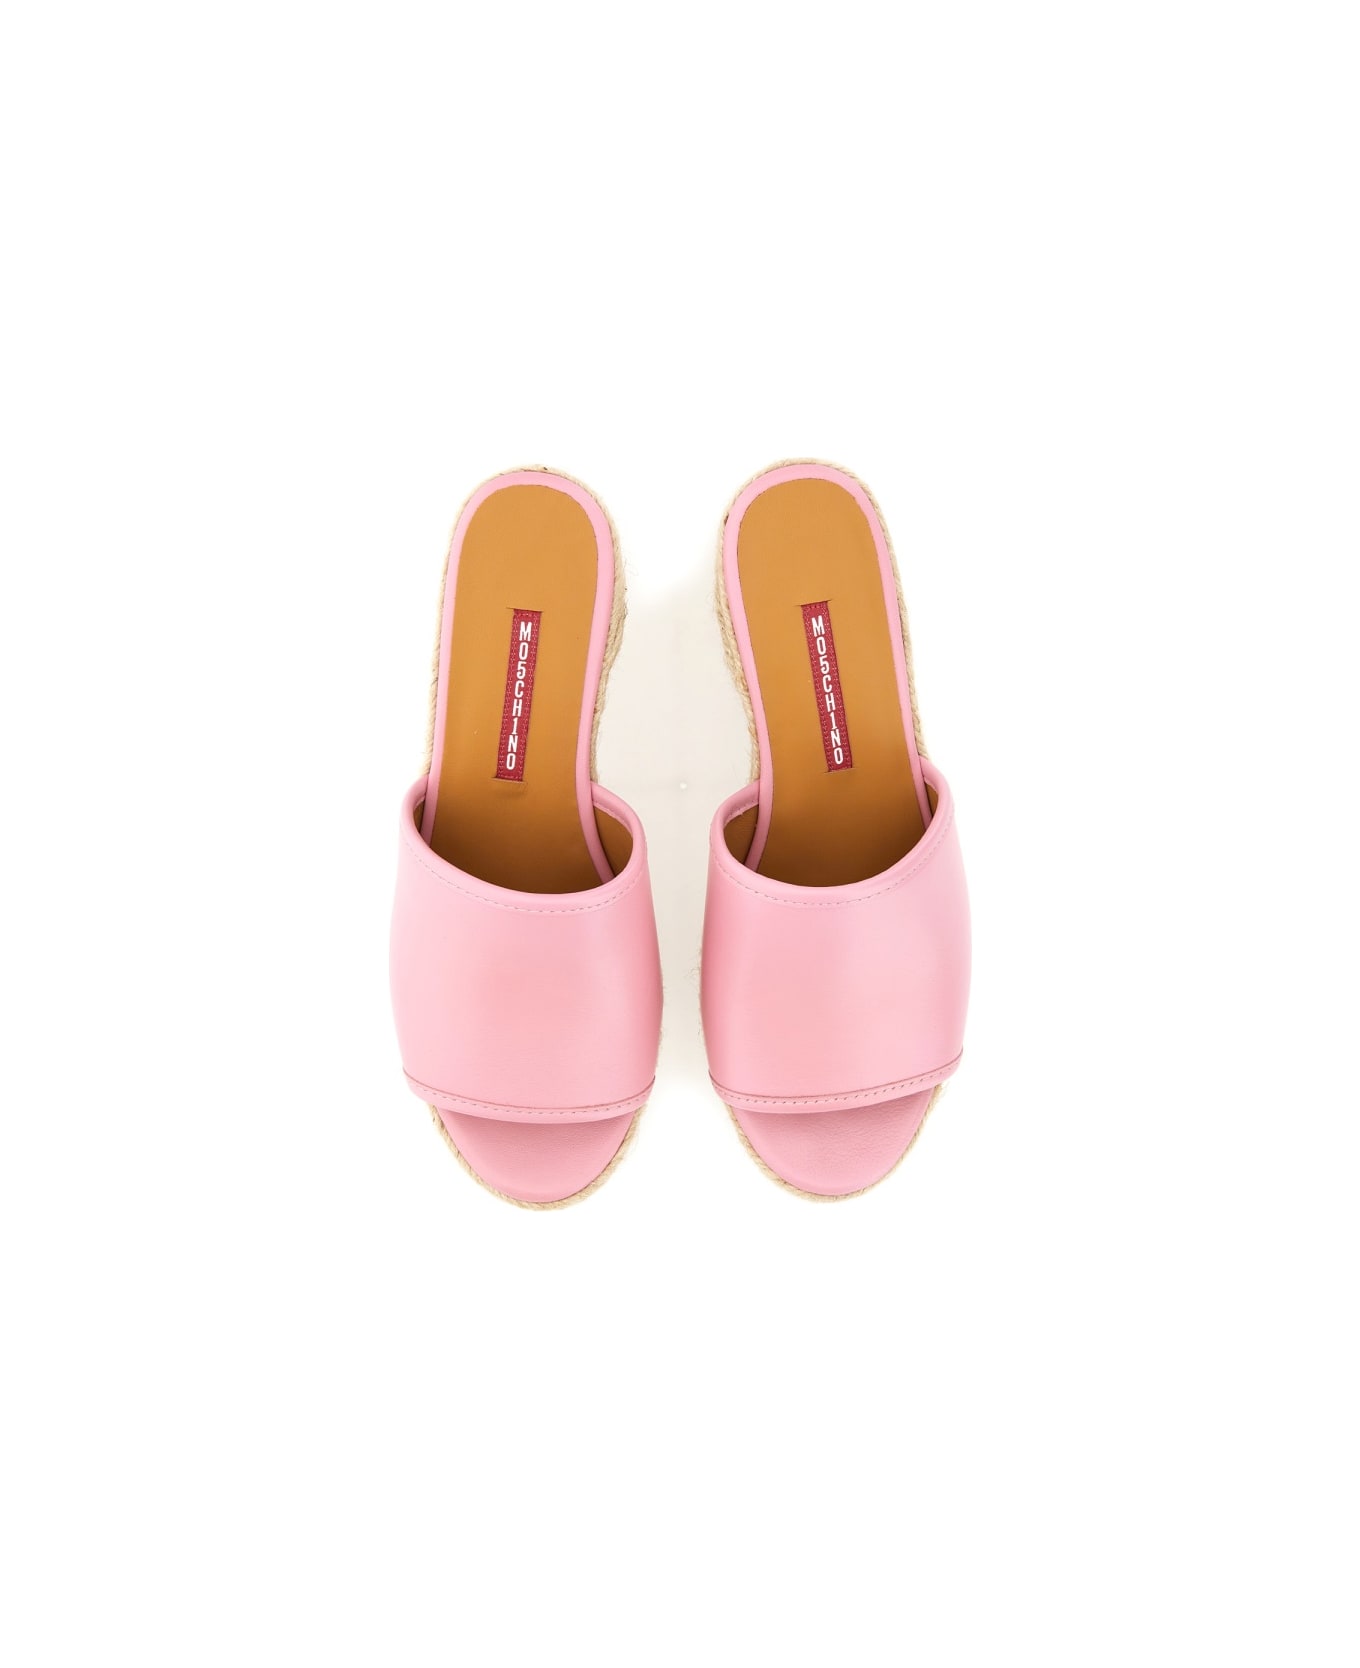 M05CH1N0 Jeans Leather Sandal - PINK